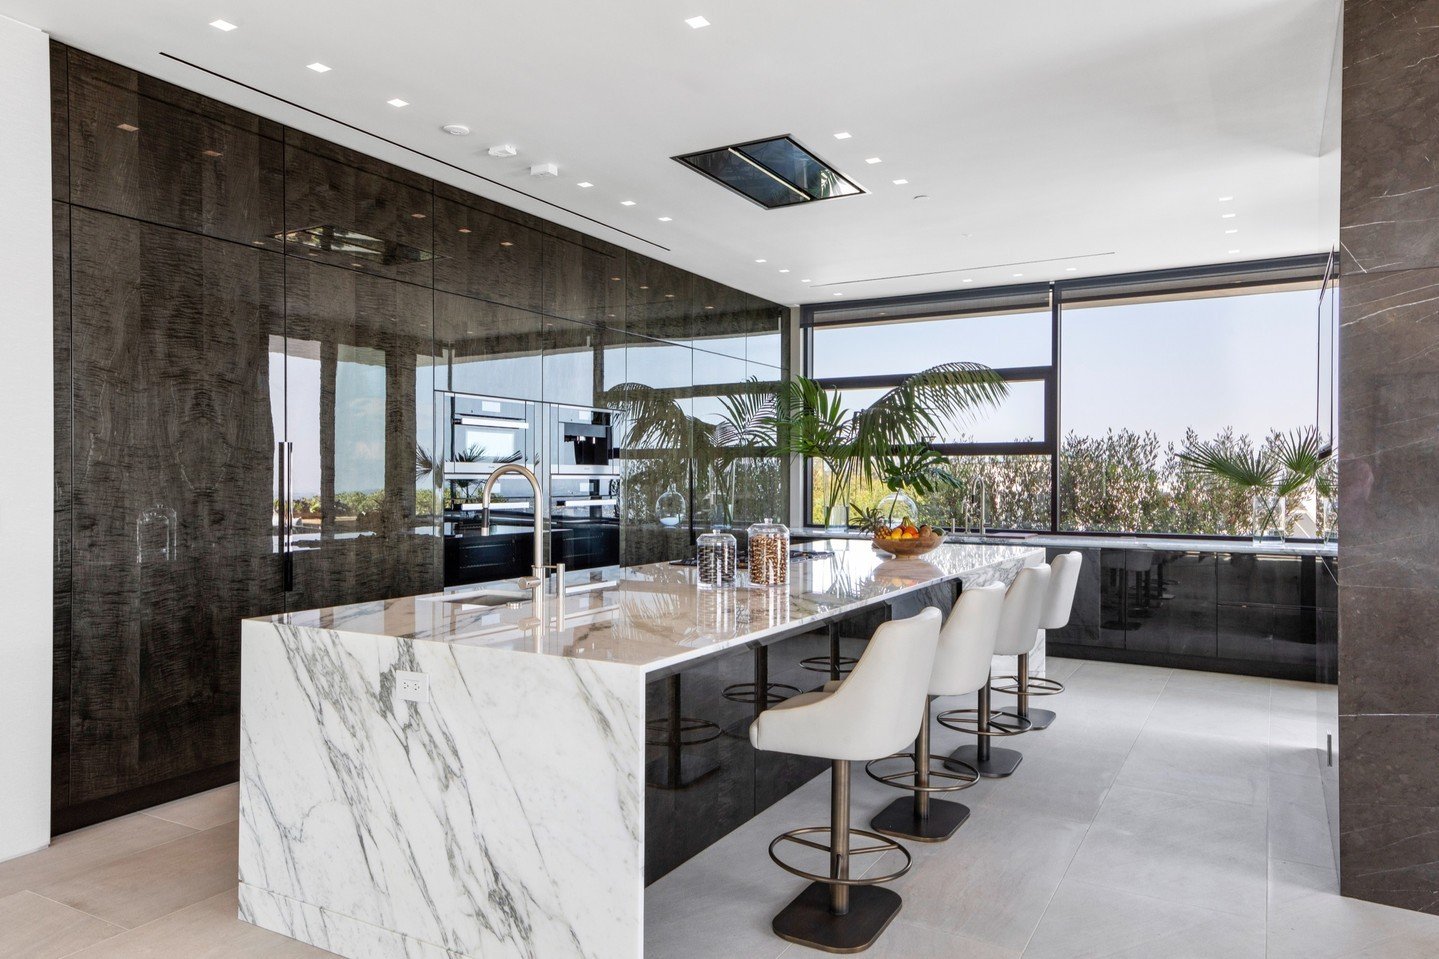 The luxury light filled kitchen at our Summitridge Drive House in Beverly Hills. Photo by @mrbarcelo